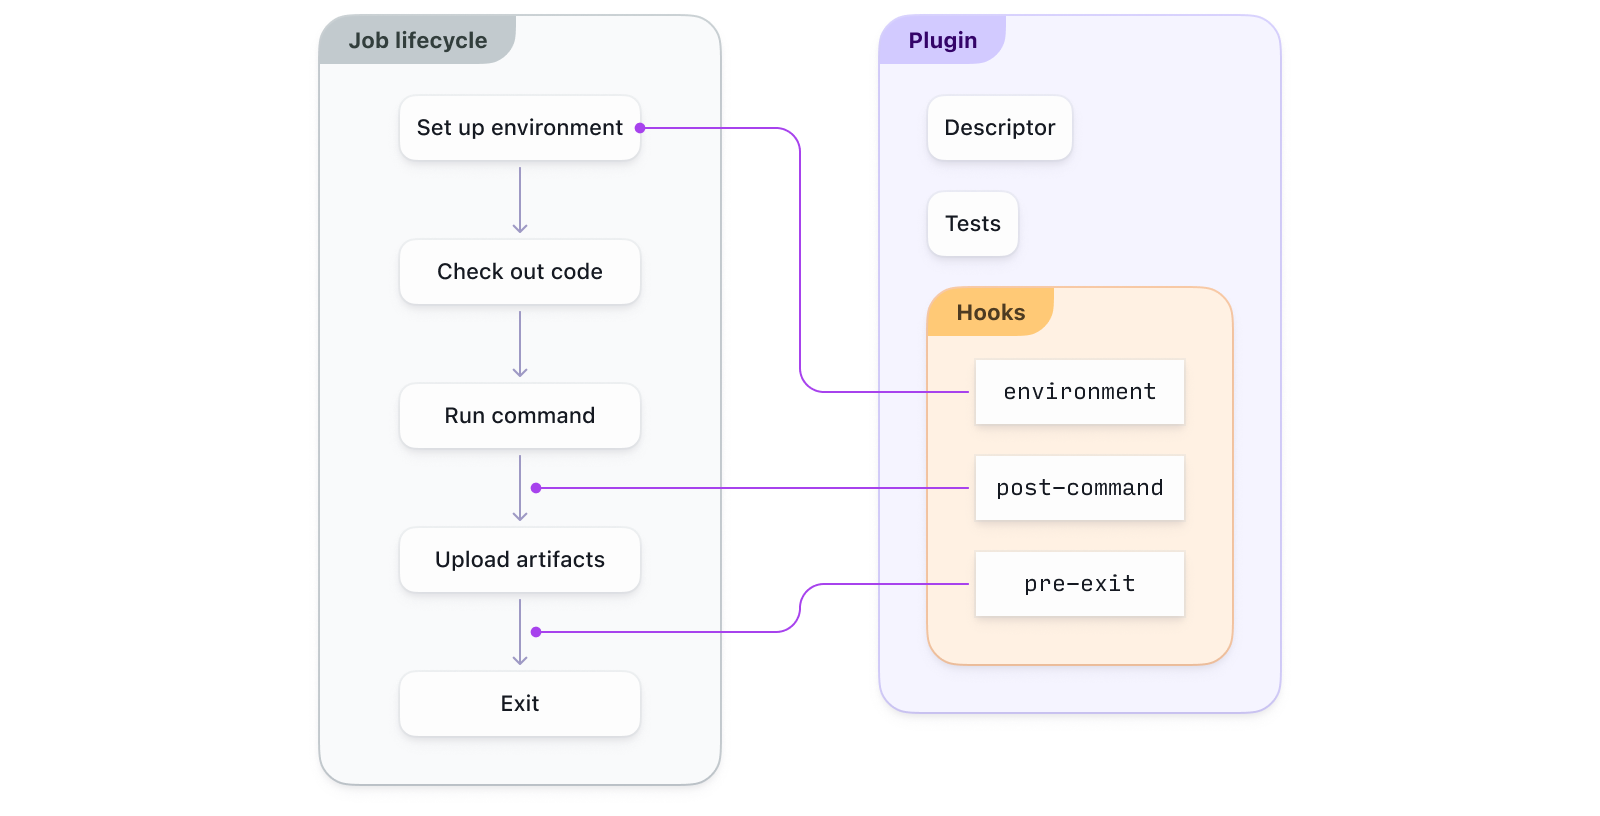 A plugin interacts with the job lifecycle using environment, post-command, and pre-exit hooks